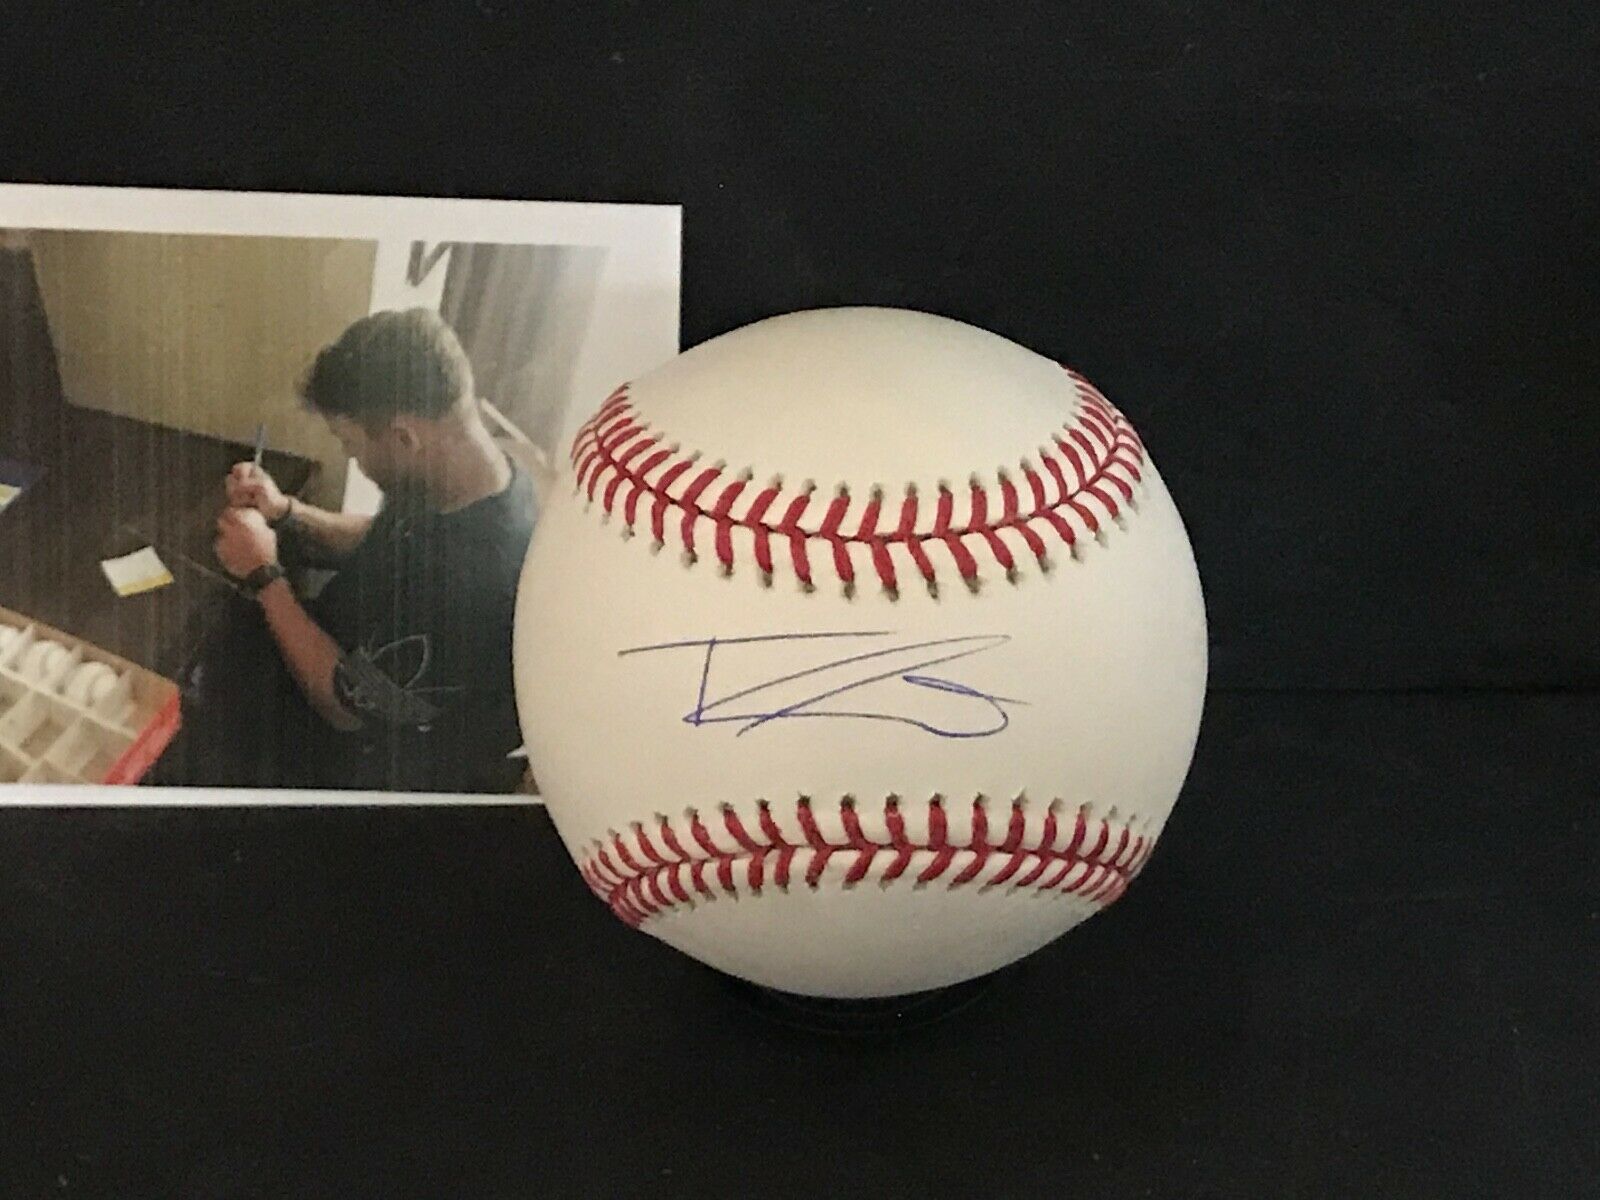 Travis Swaggerty Pittsburgh Pirates Autographed Signed MLB Baseball